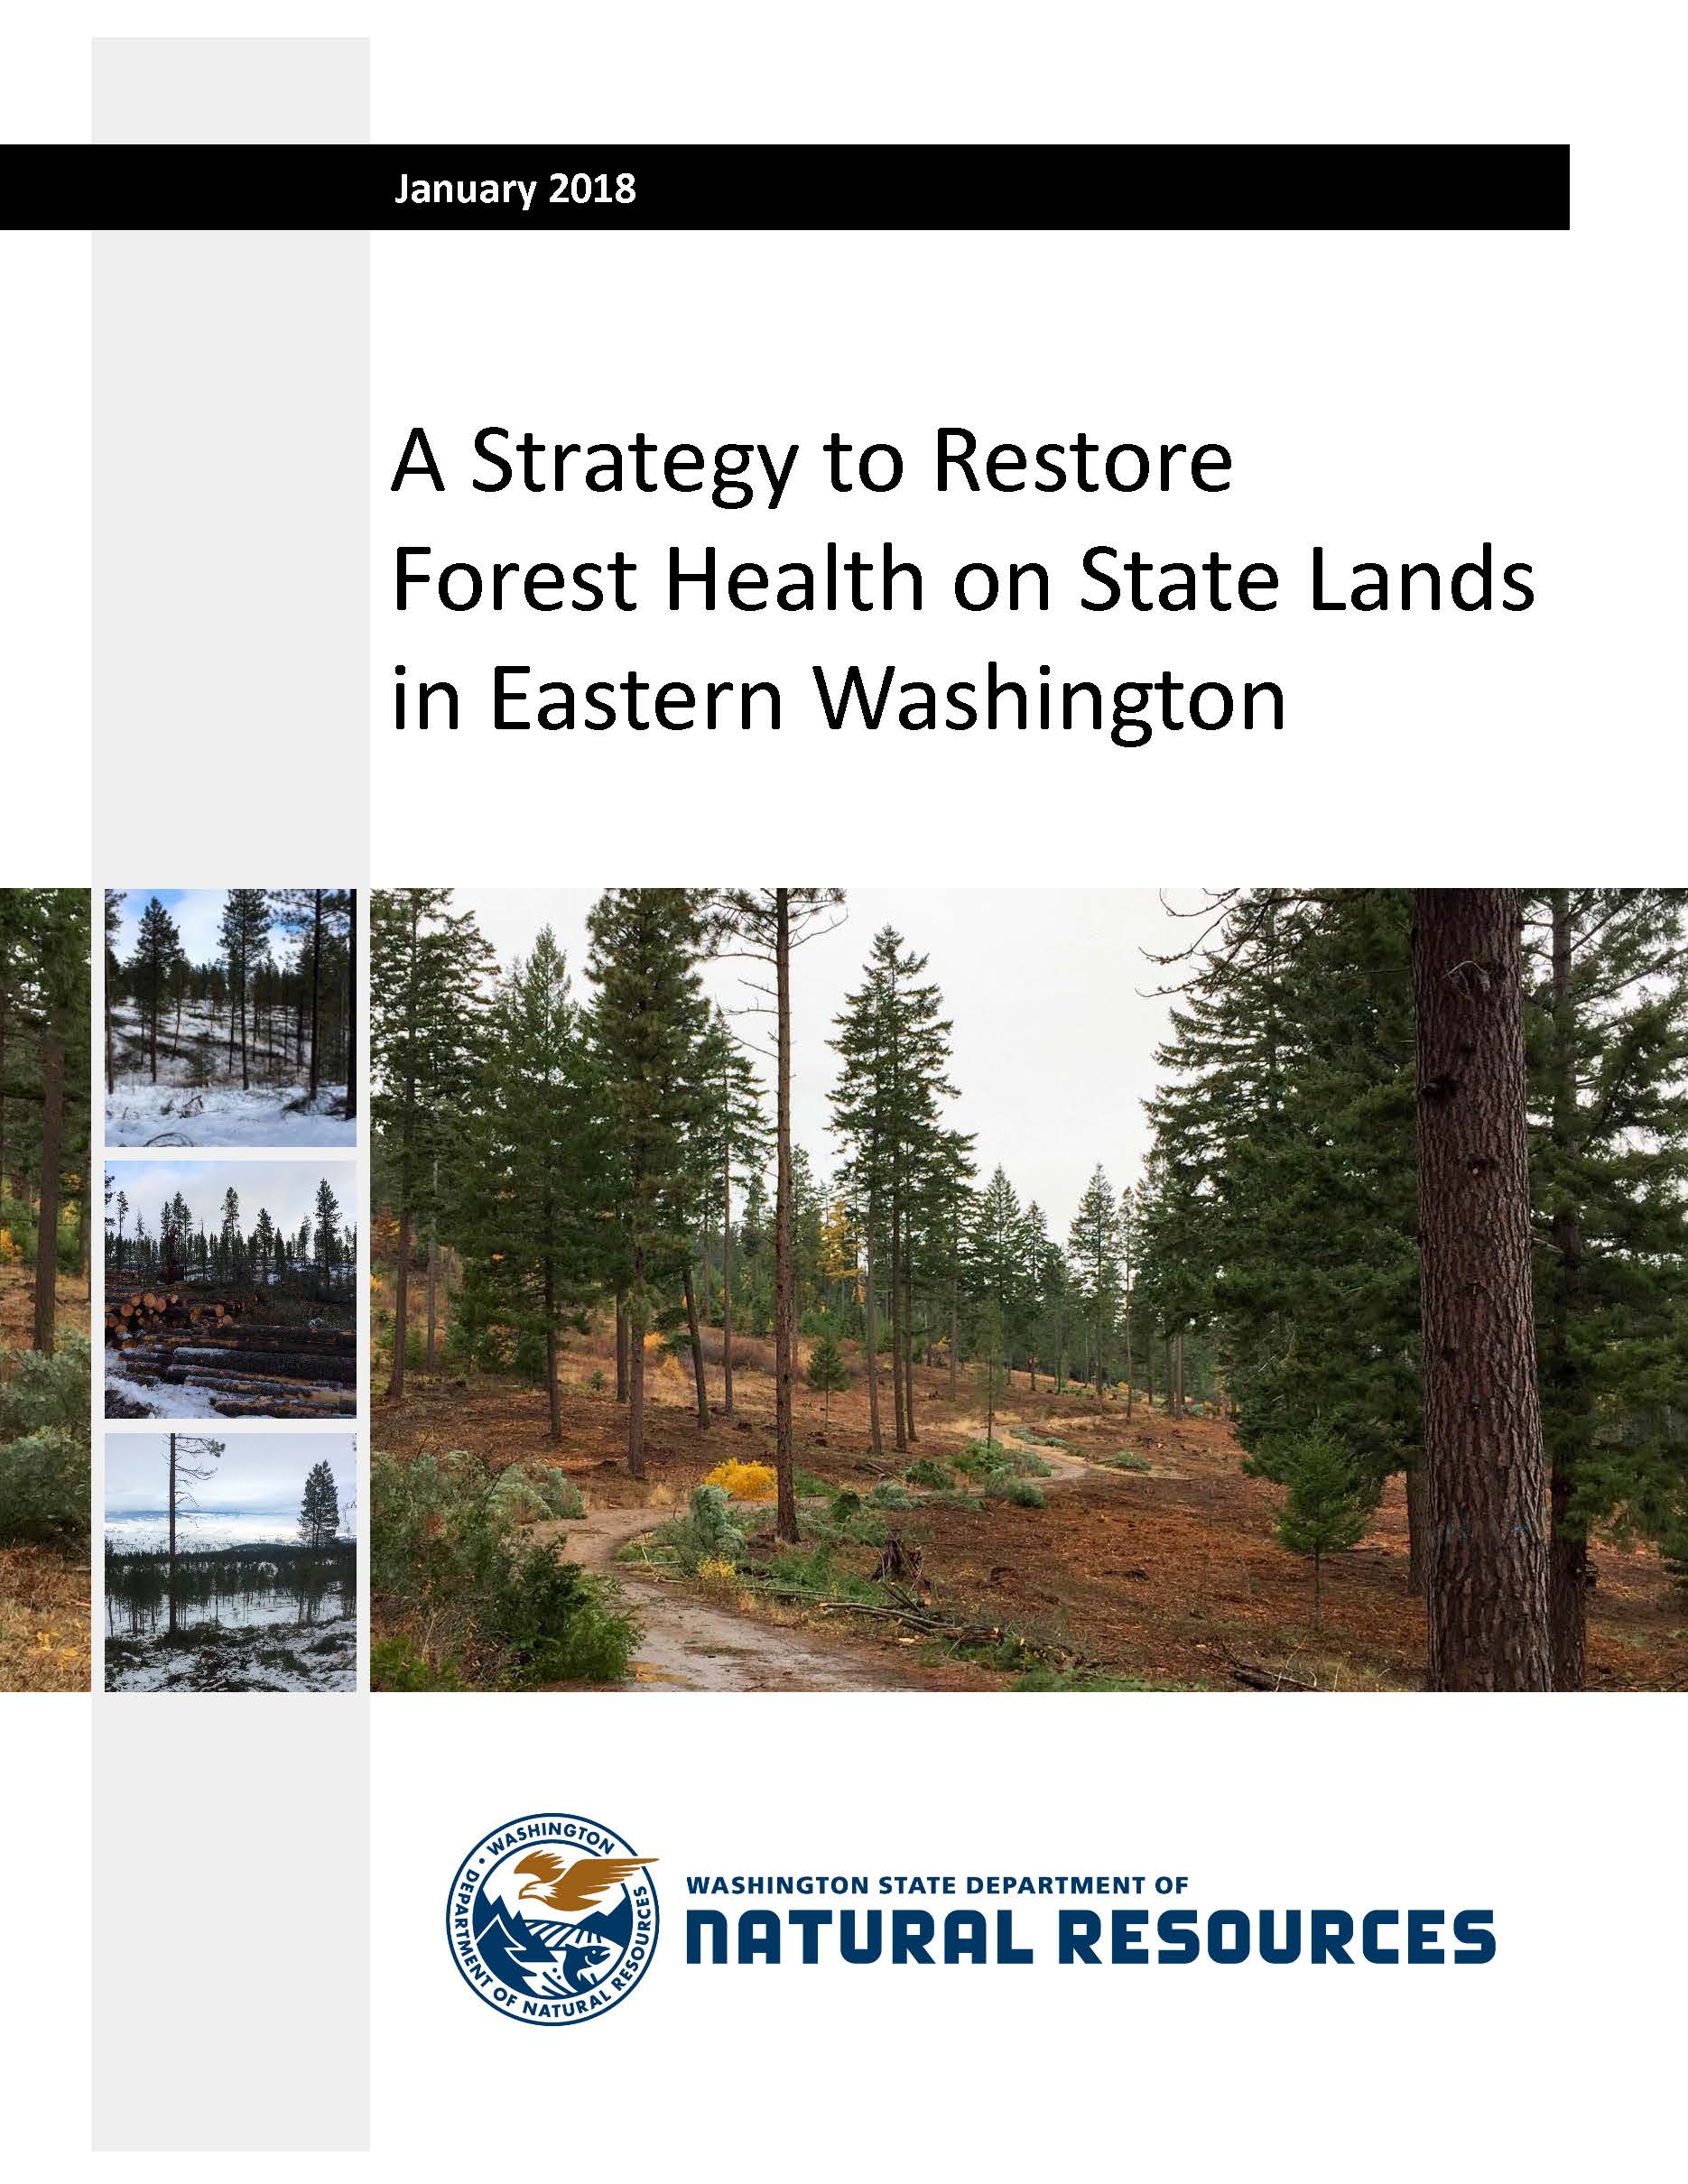 Image of DNR's Strategy to Restore Forest Health on State Lands in Eastern Washington (2017)